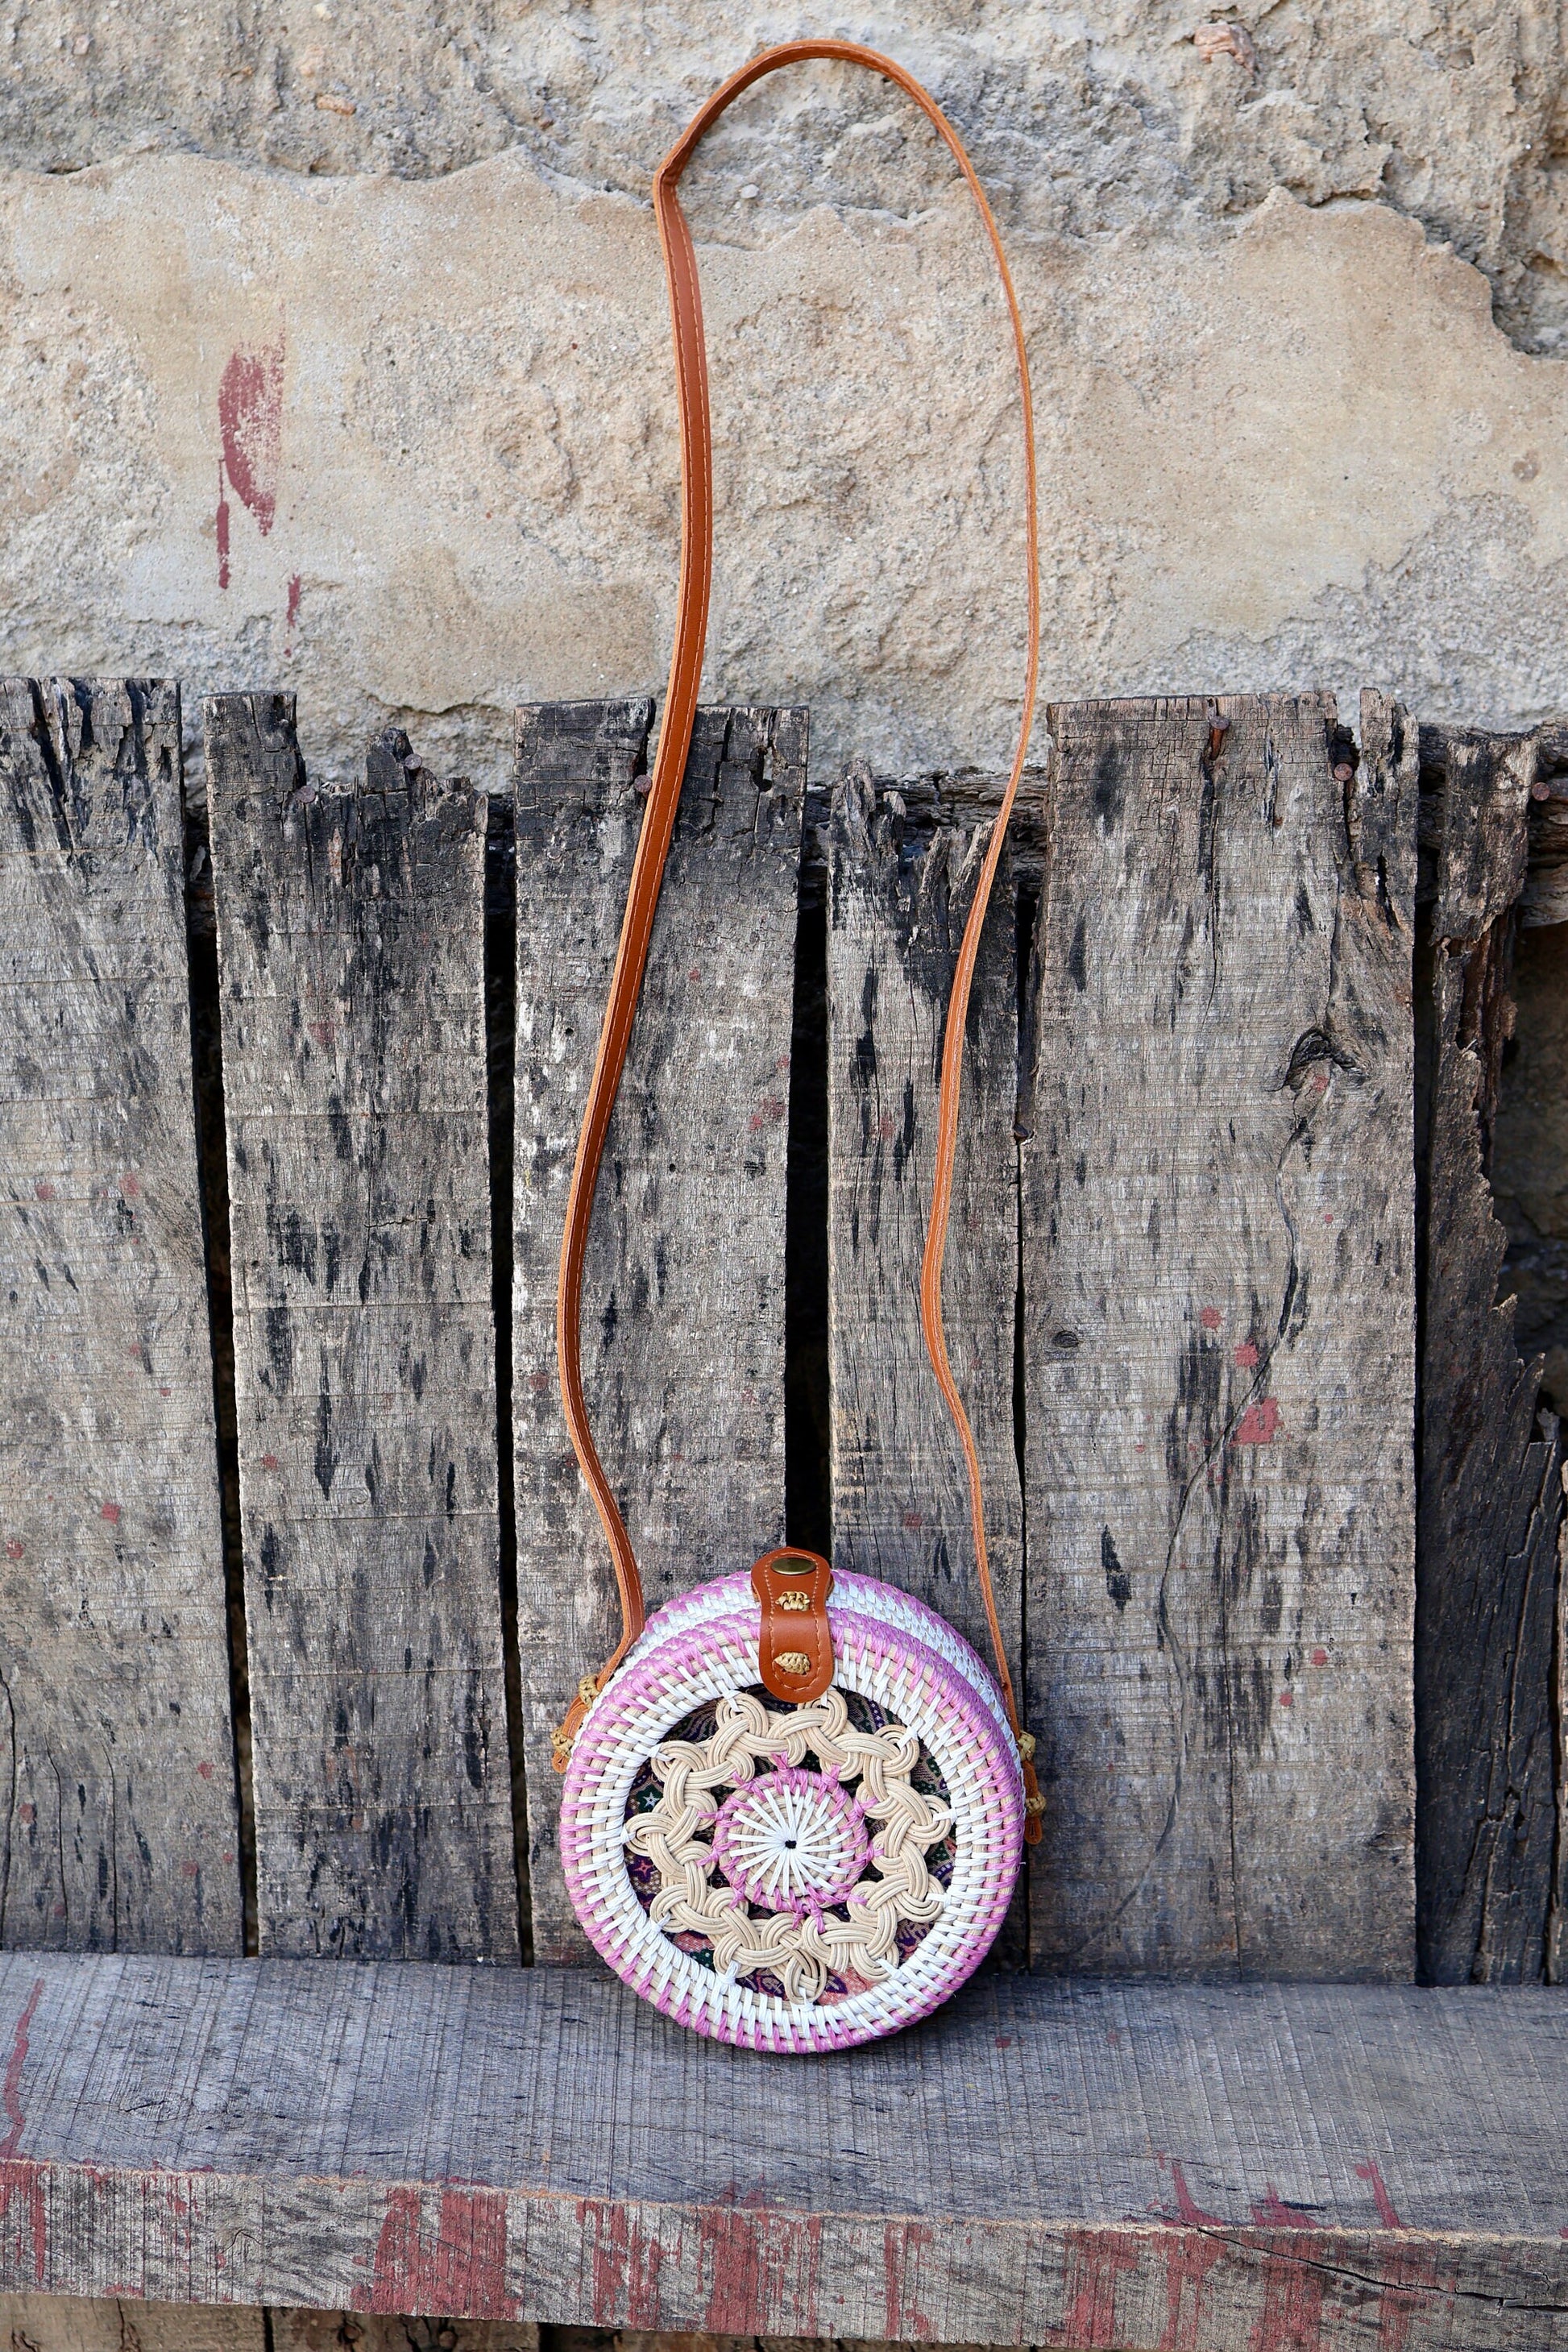 Pink Round Rattan Bag with Braid Pattern, Bali Bags, Handwoven Crossbody Purse, Braided Straw Bag, Bali Sling Bags Rattan Bags Gift for her